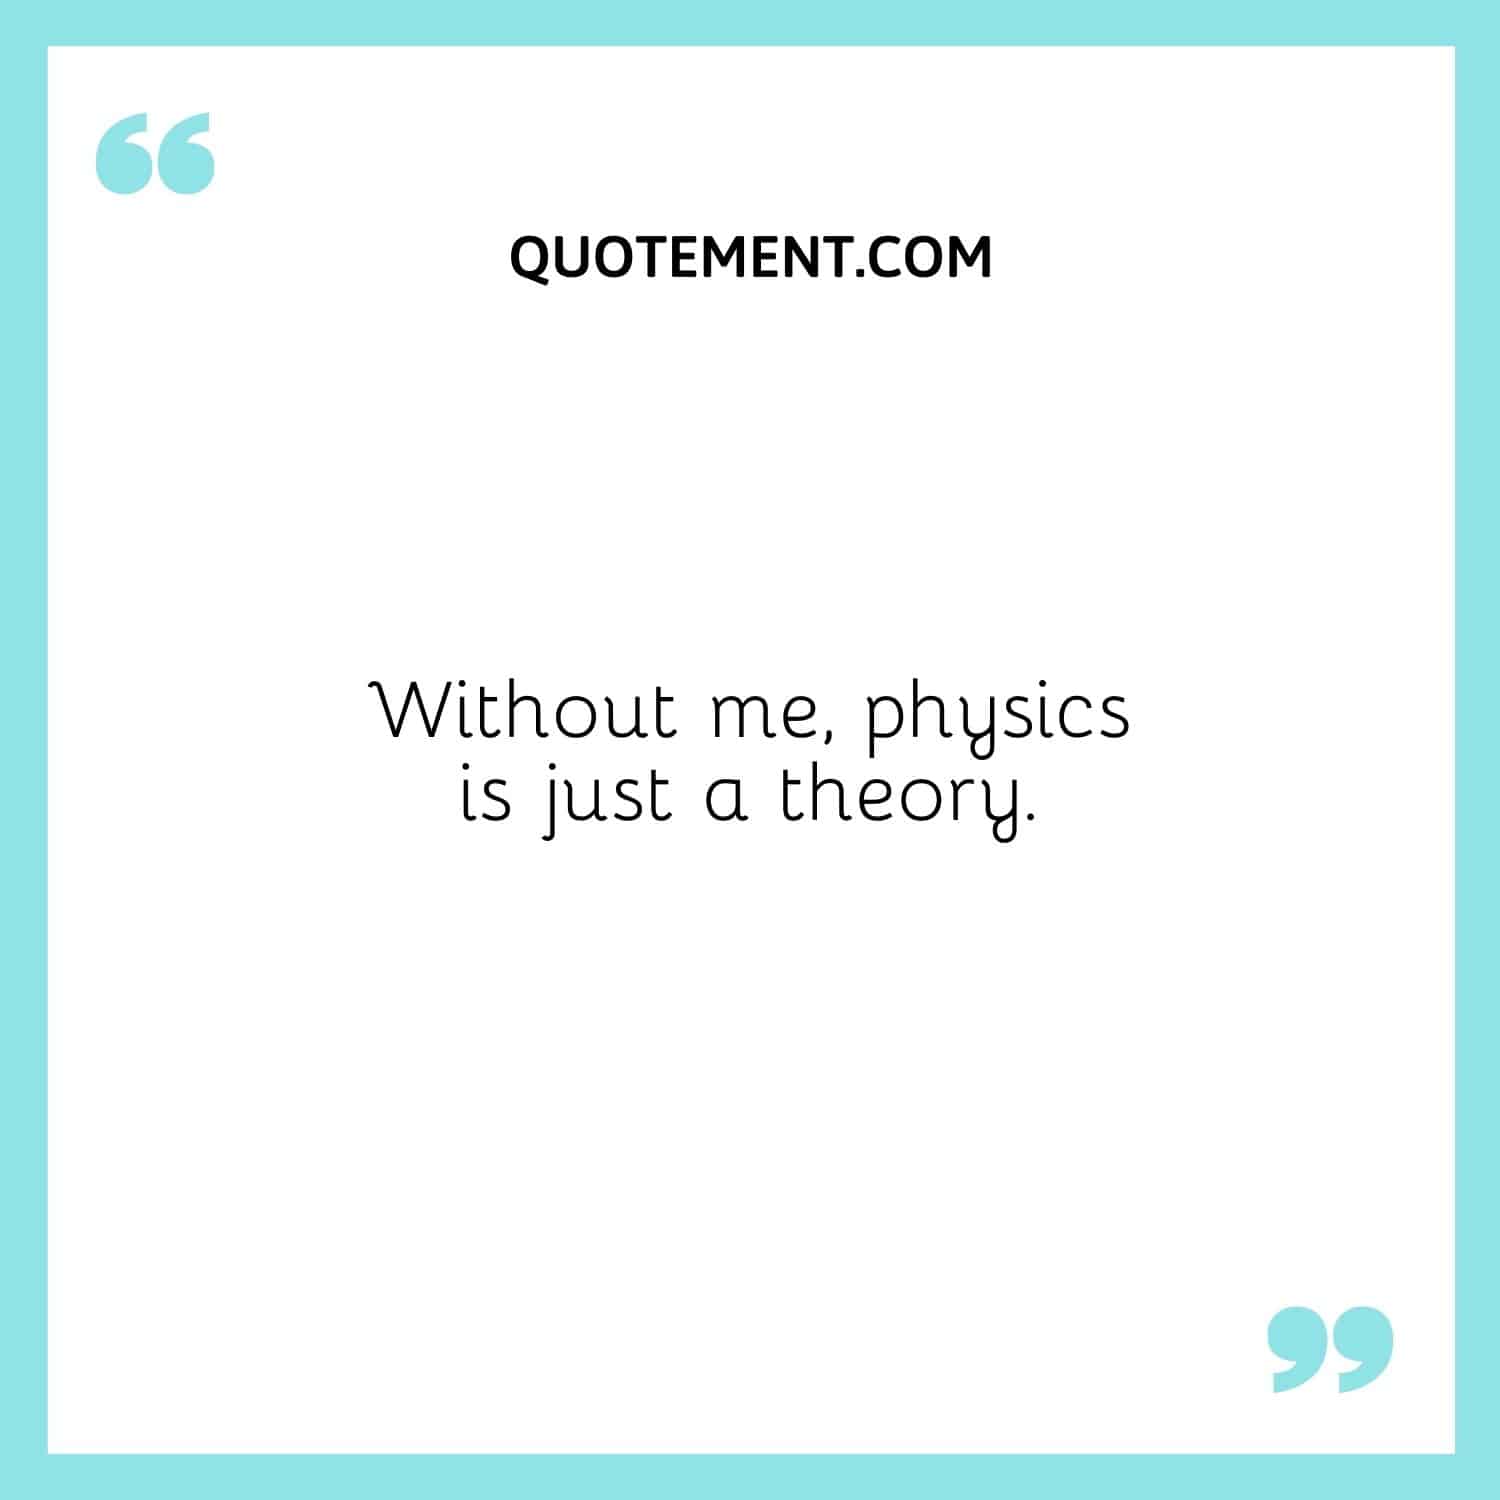 Without me, physics is just a theory.